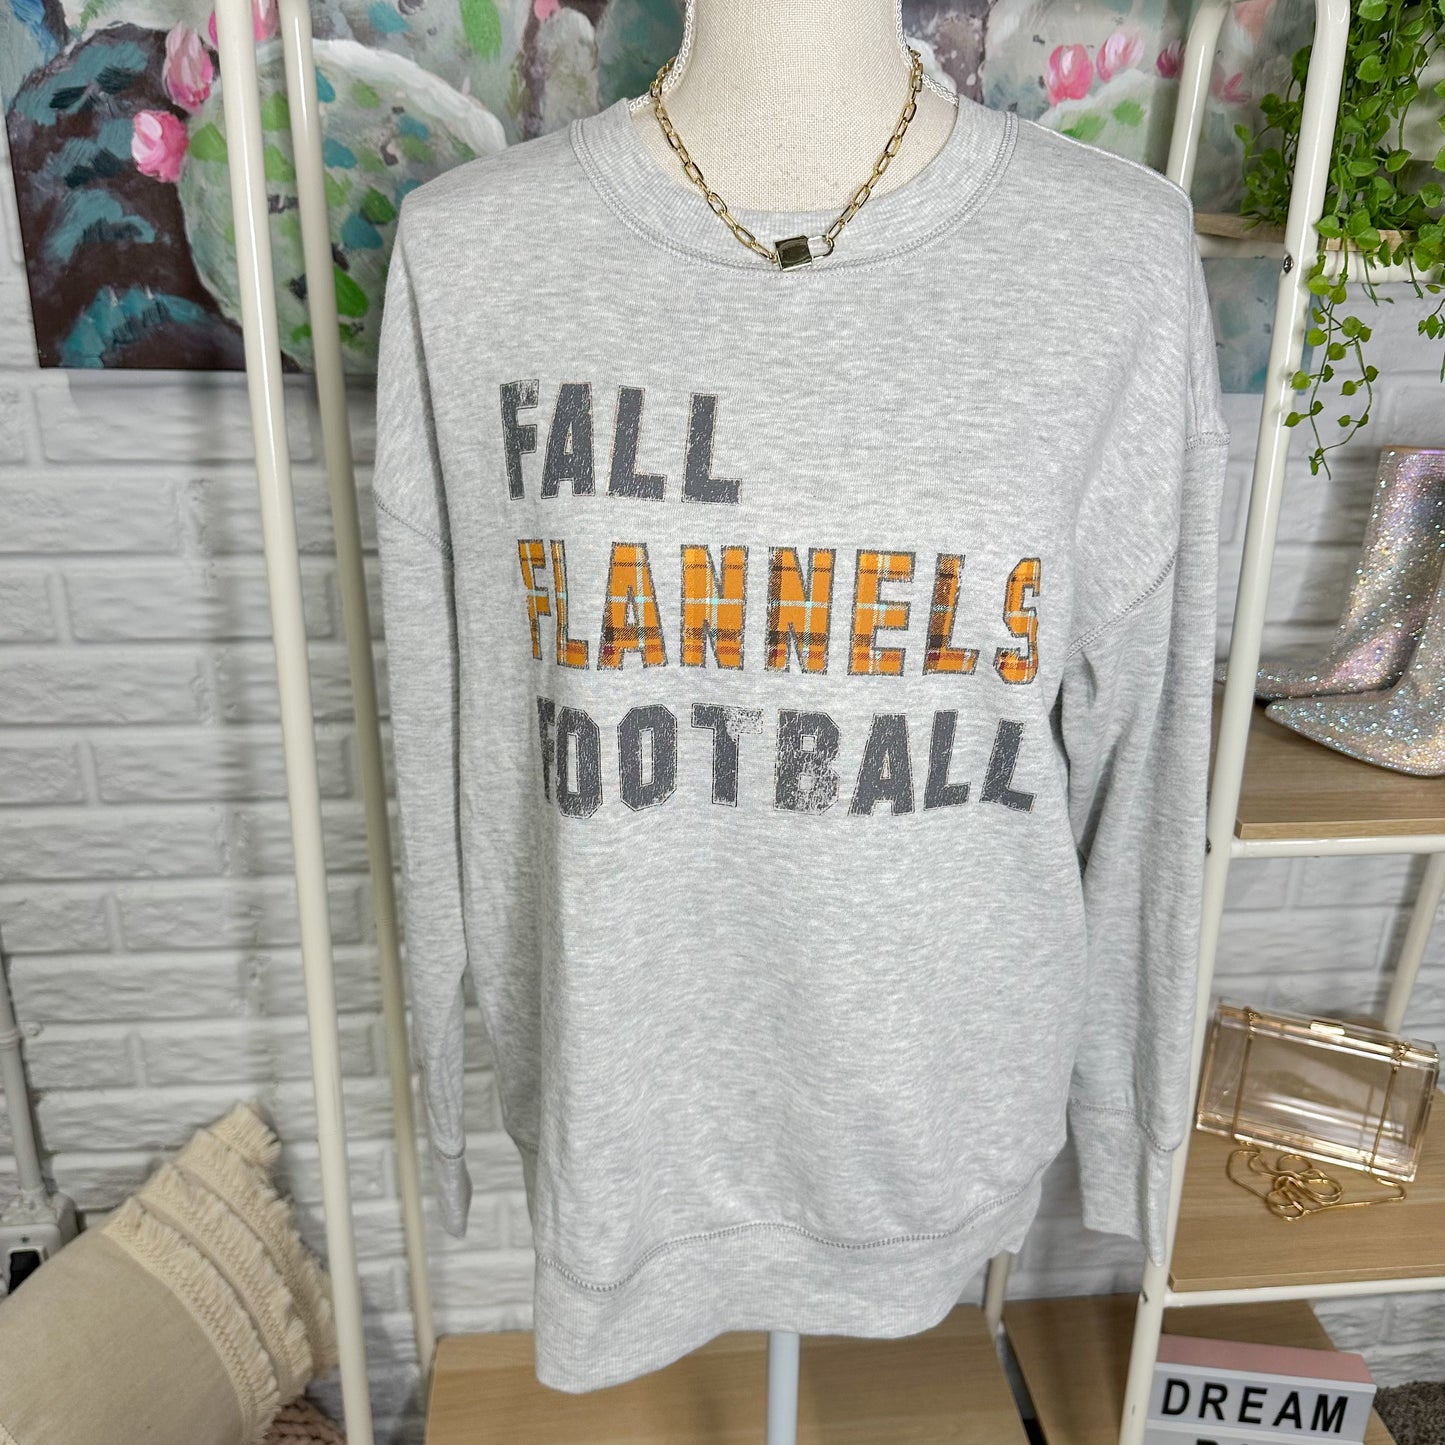 Maurice’s New Fall Flannels & Football Graphic Sweatshirt Size Small